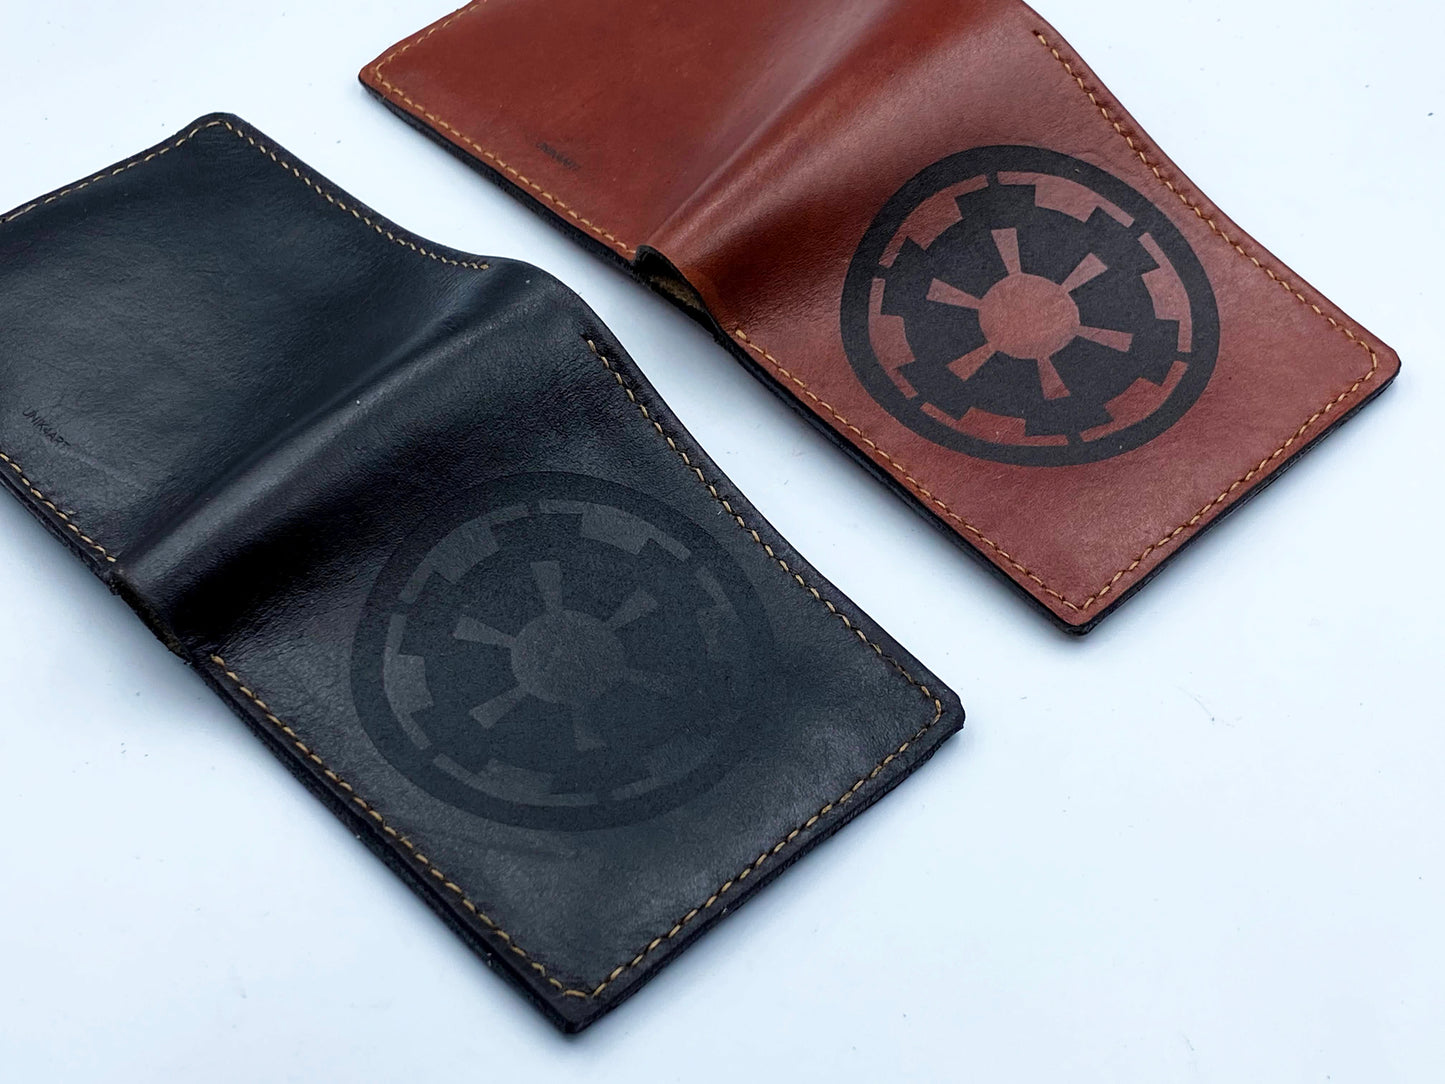 Mayan Corner - Starwars Imperial Crest logo custom leather handmade men's wallet, unique present for men, anniversary gifts for husband, boyfriend, father, brother